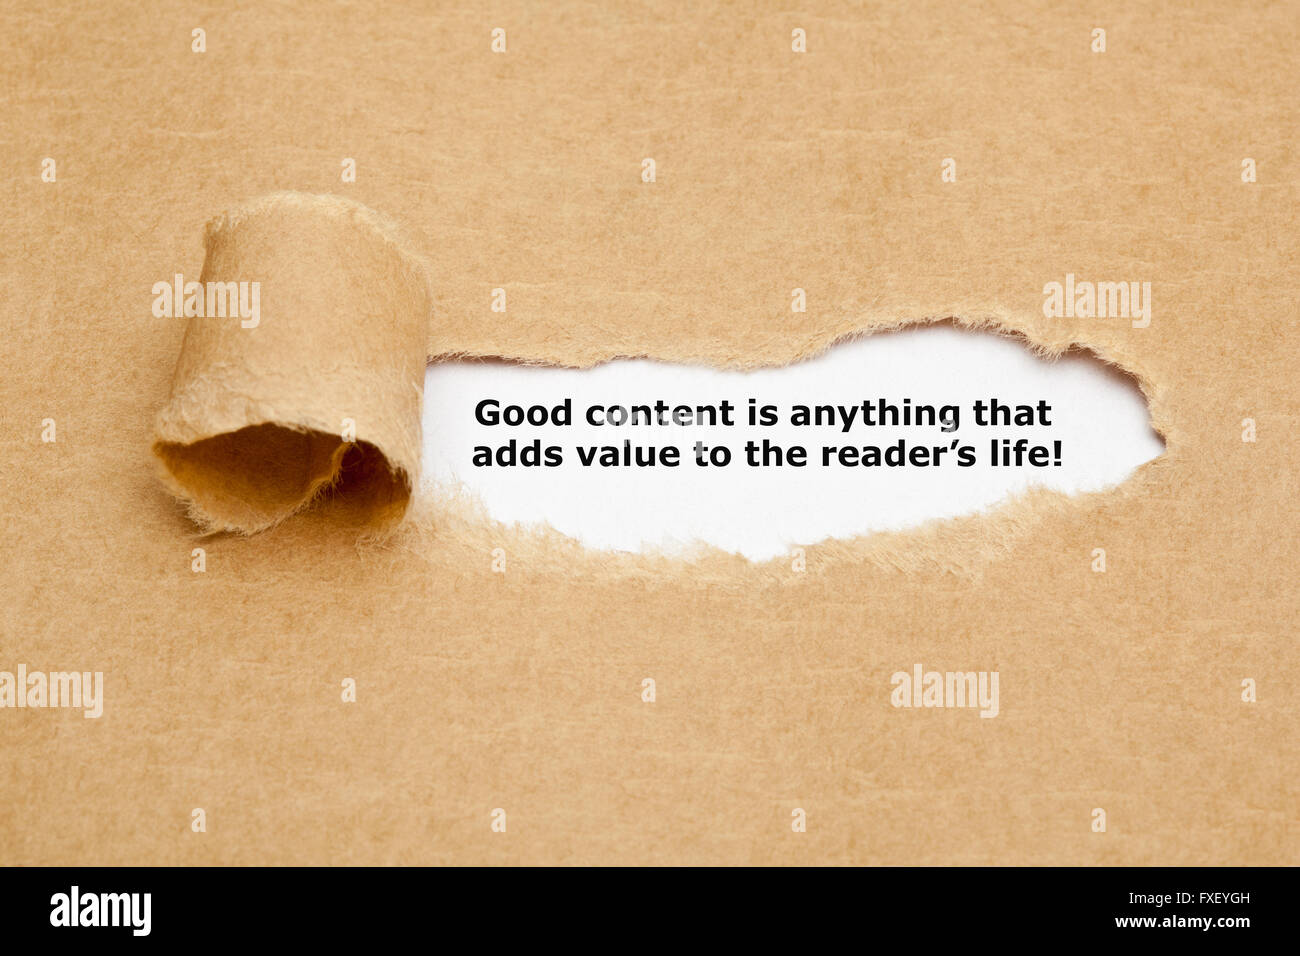 The quote Good content is anything that adds value to the readers life, appearing behind torn brown paper. Stock Photo